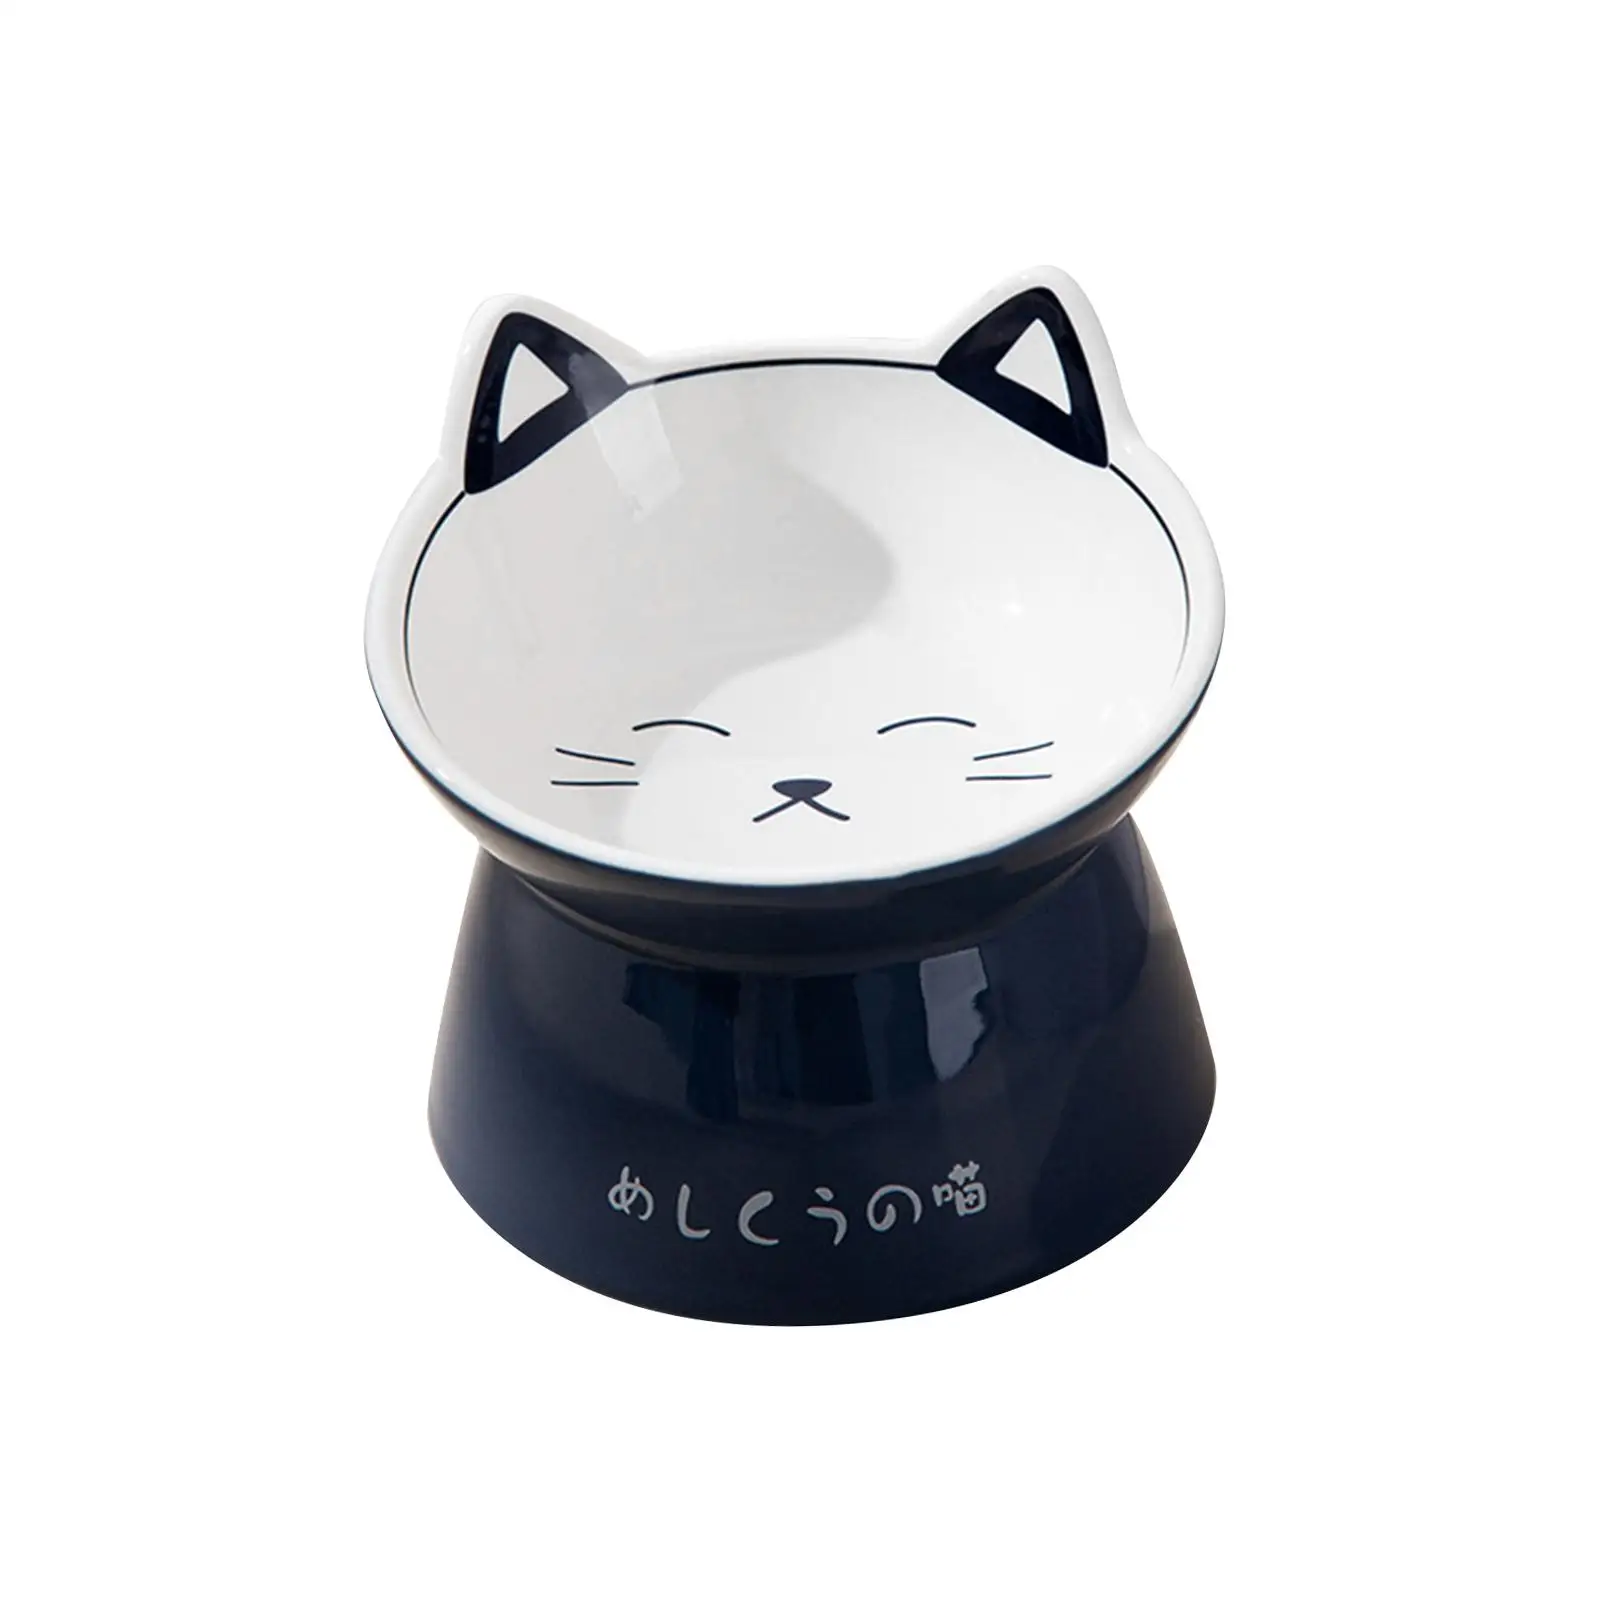 Ceramic Raised Cat Food Bowl dish Stable Base Smooth Surface Cat Feeding Watering Supplies Sturdy Easily Wash Porcelain Bowl